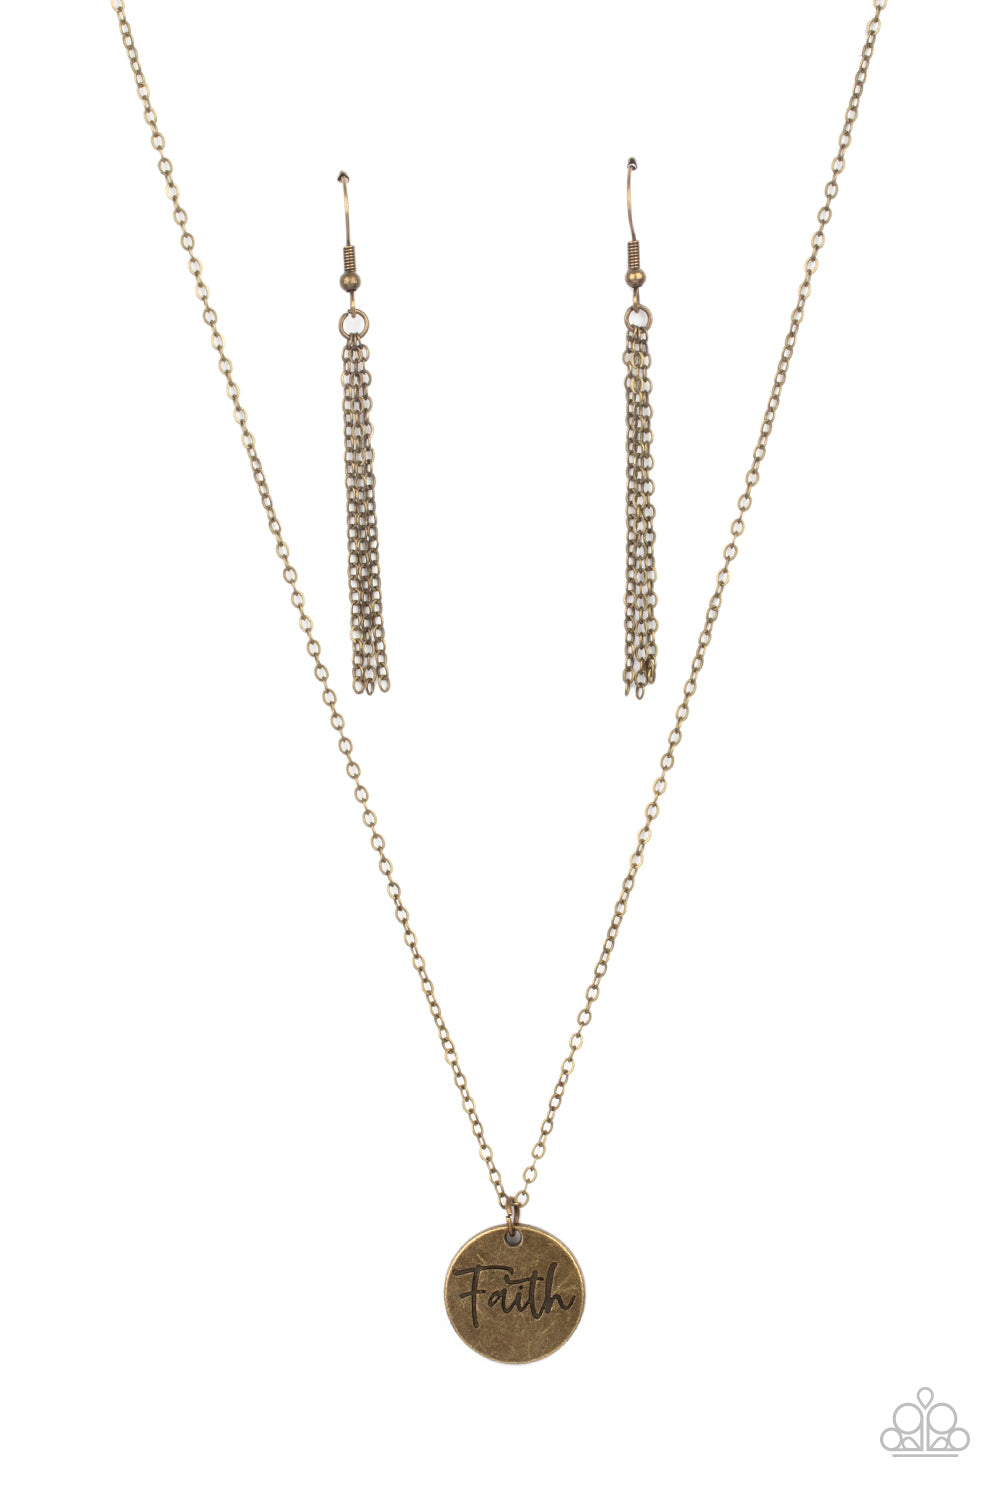 Choose Faith Brass Necklace - Paparazzi Accessories  A dainty brass disc is stamped in the word, "Faith," at the bottom of a rustic brass chain, creating an inspiring pendant below the collar. Features an adjustable clasp closure.  All Paparazzi Accessories are lead free and nickel free!  Sold as one individual necklace. Includes one pair of matching earrings.